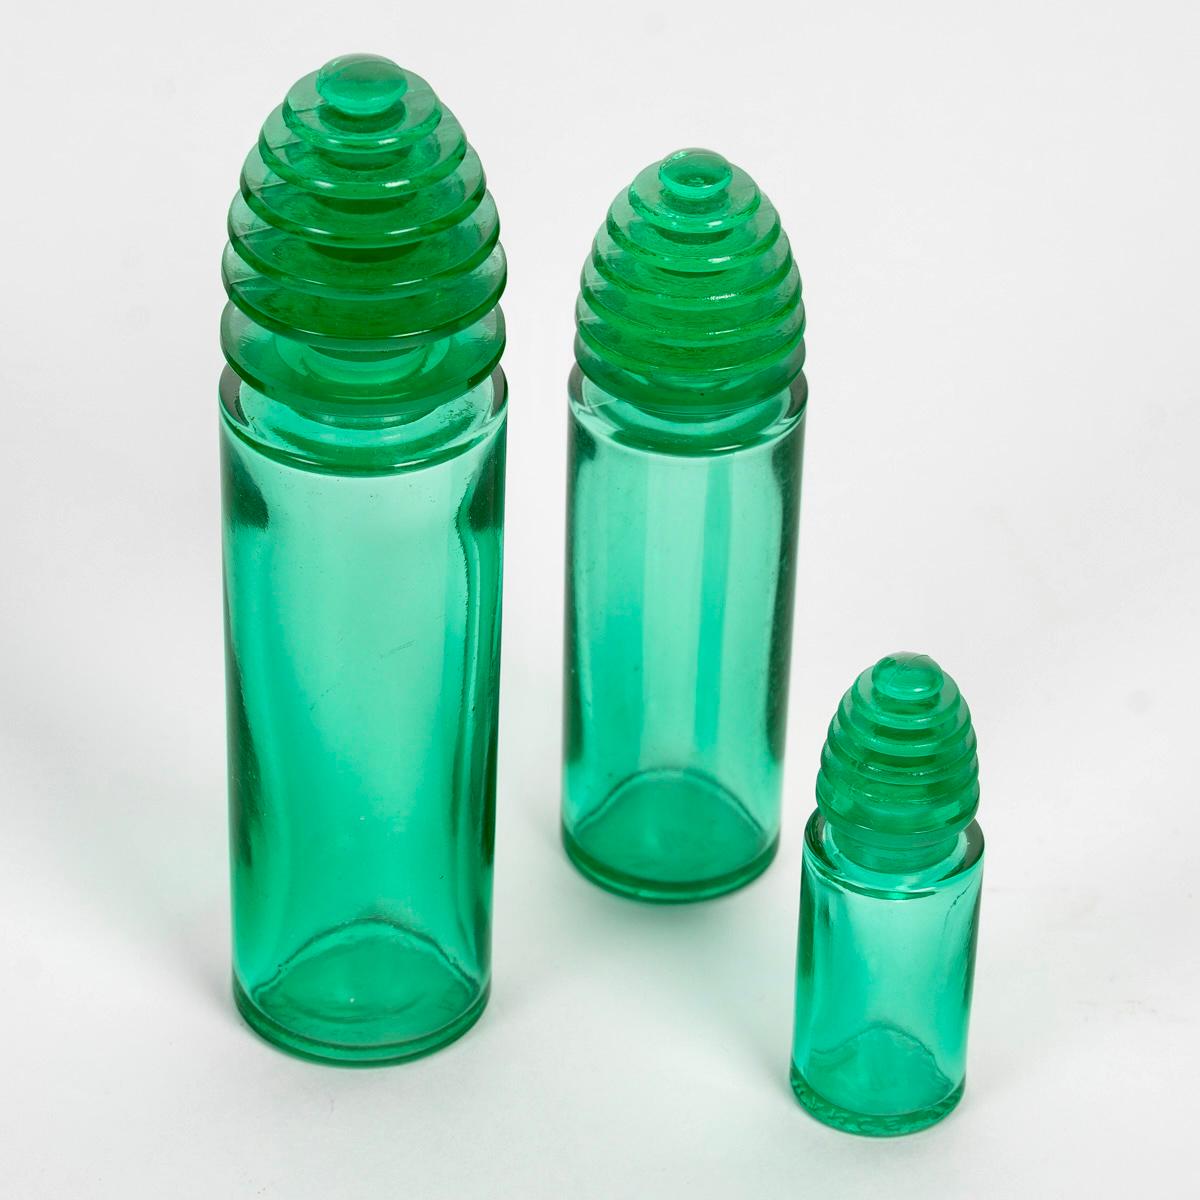 Set of three perfume bottles “Sans Adieu” made in emerald green glass by René Lalique in 1929 for Worth.
Molded signature on each bottle.

Perfect condition. Rare set including the three sizes made for this bottle.

height: 14 cm - 11 cm - 7